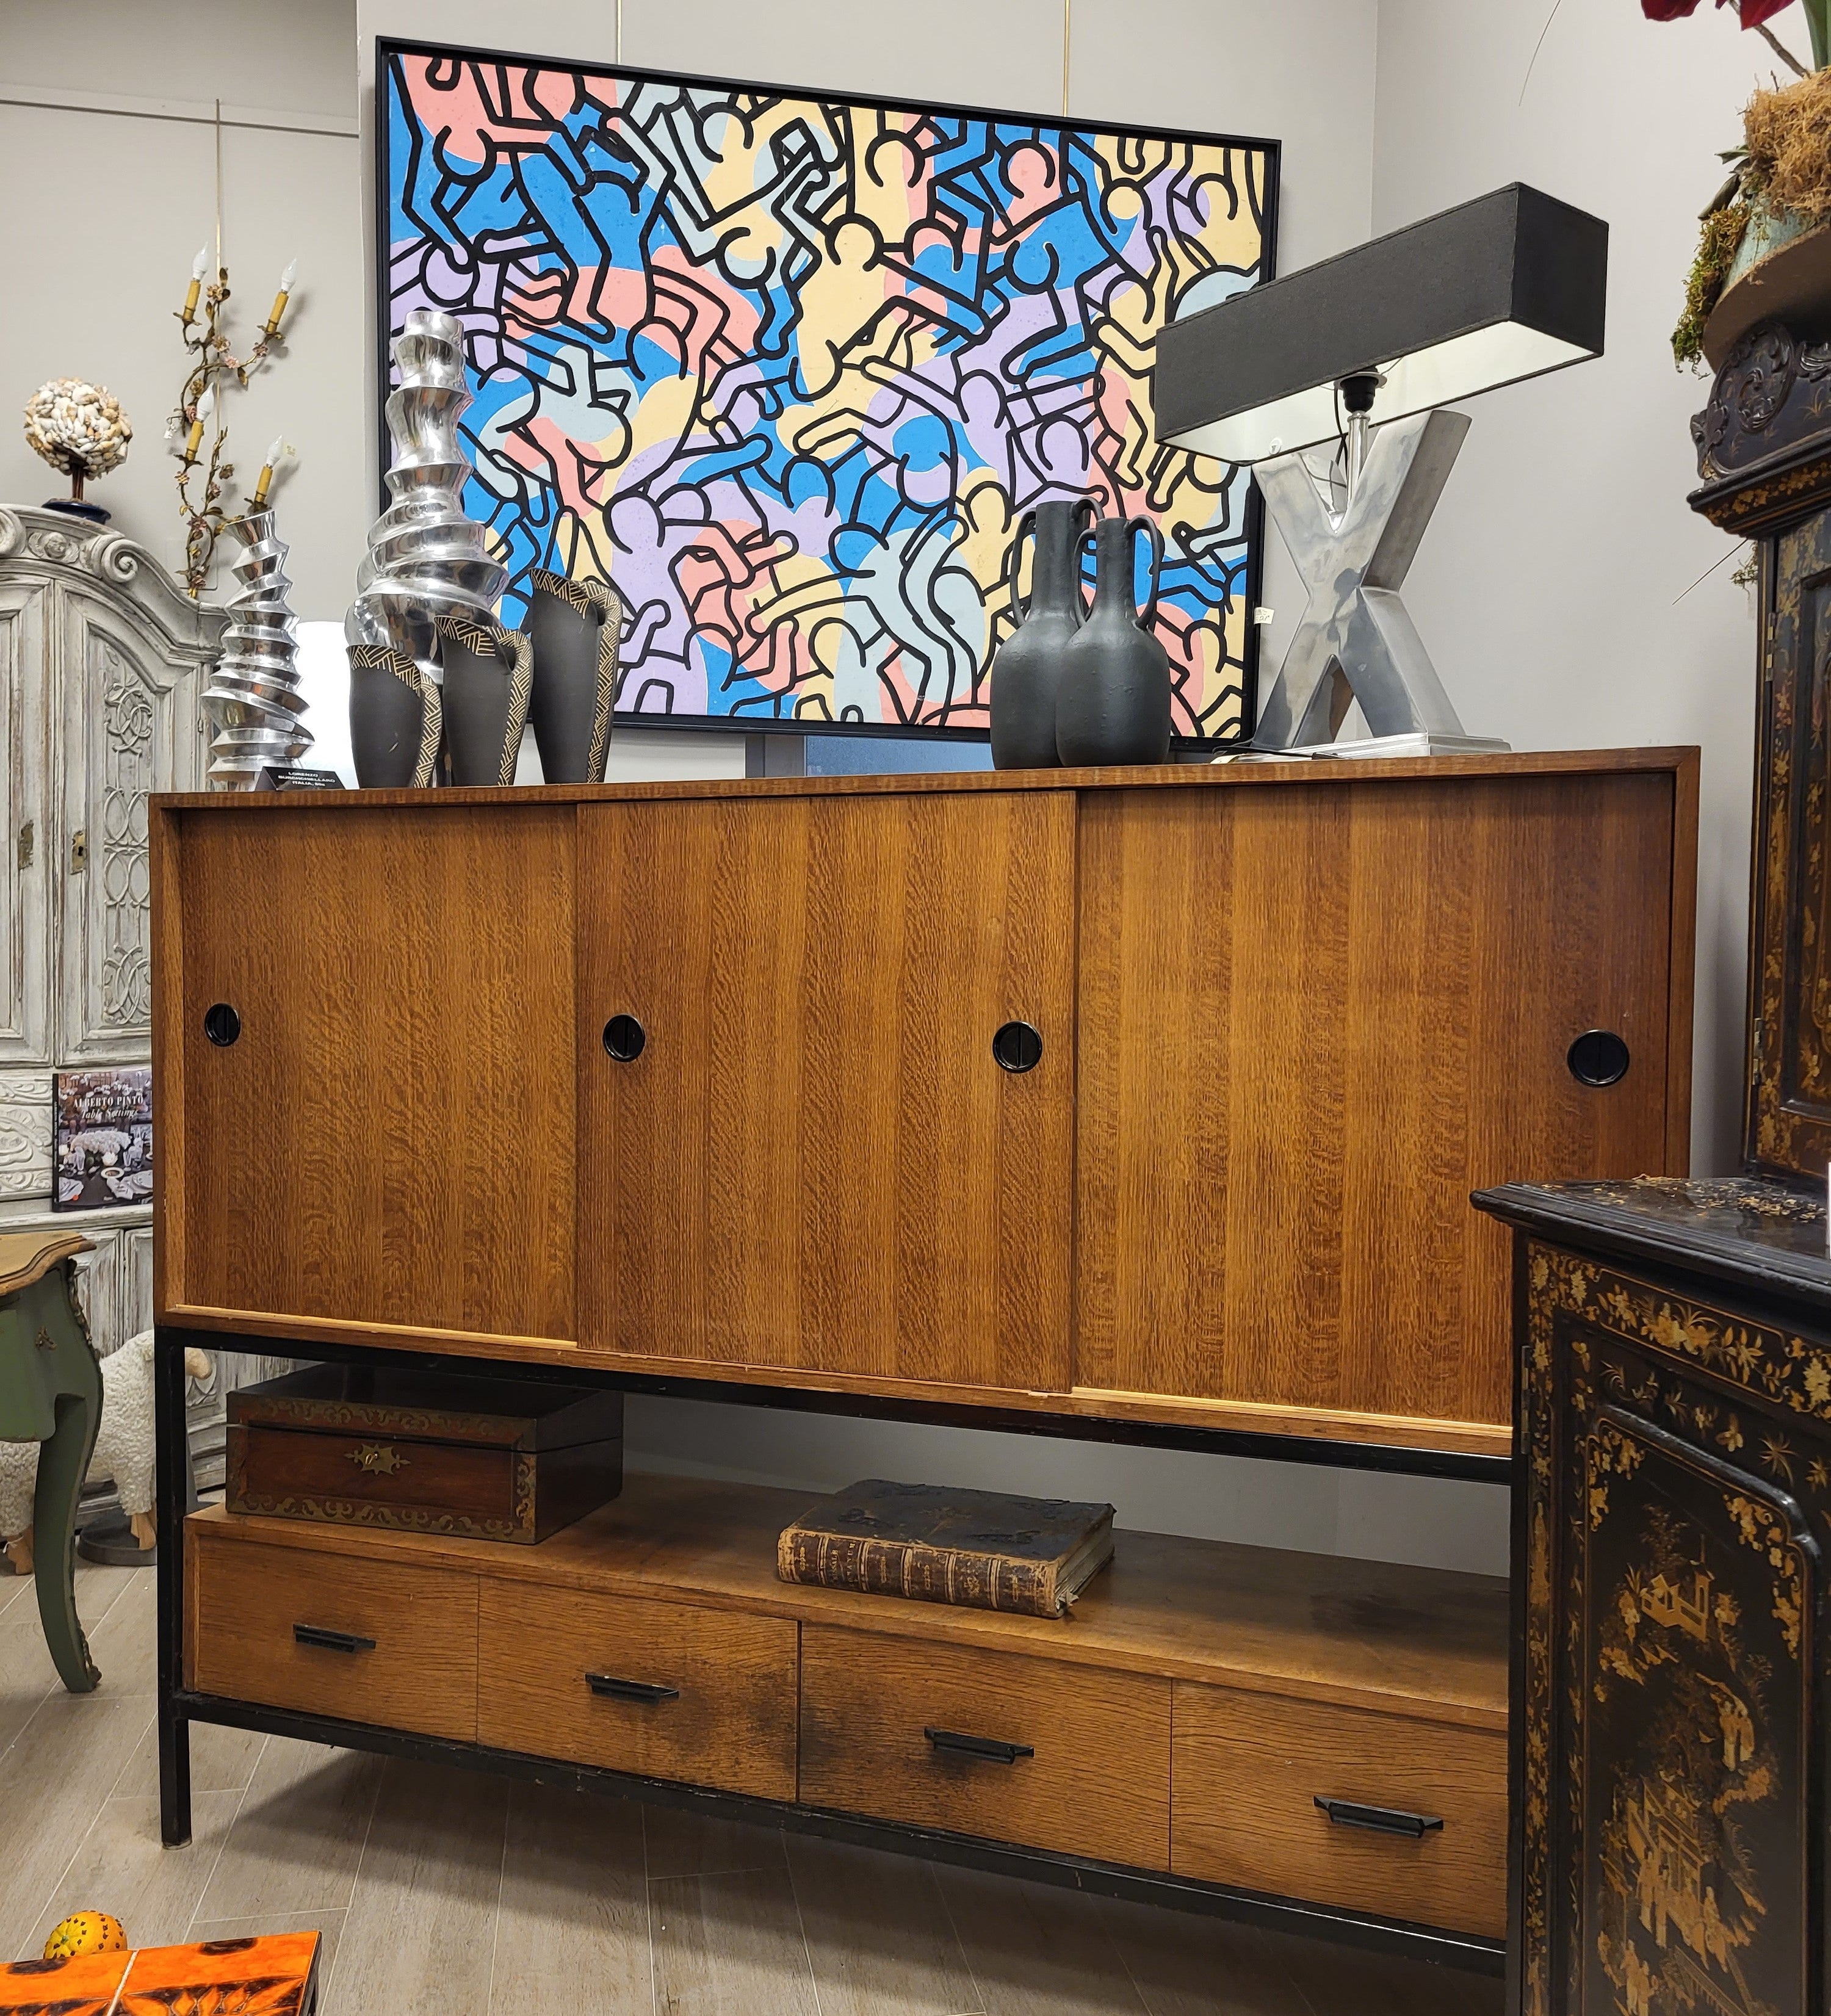 This  Gorgeous cabinet is a testament to Scandinavian ingenuity and craftsmanship, with an upper body housing three sliding drawers with circular handles, providing refined organizational space for the most delicate objects. The lower body has four